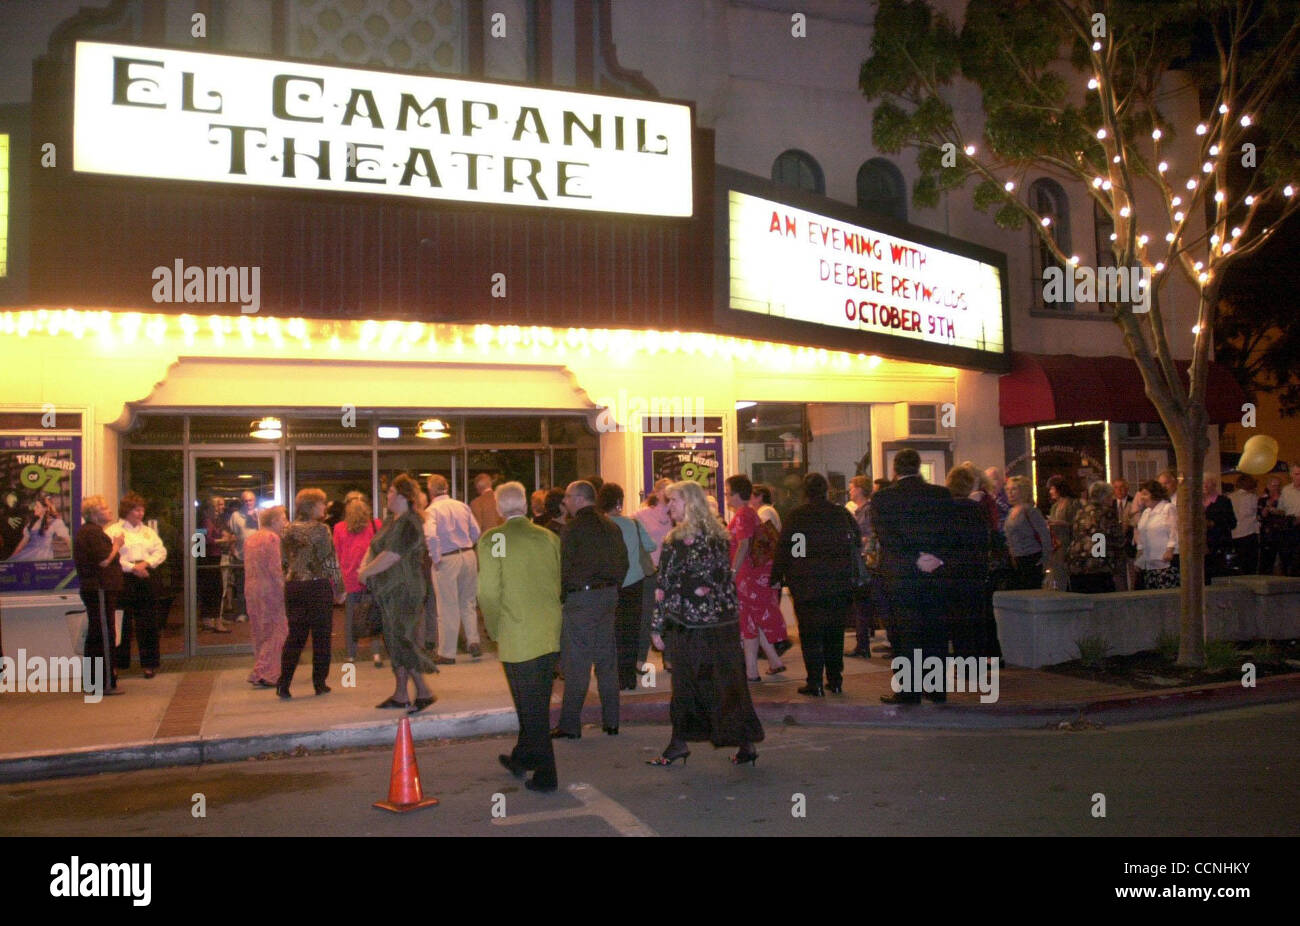 Visitors enter the El Campanil Theatre during the grand re-opening of the historic theatre in downtown Antioch, Calif. on Saturday, October 9, 2004. Debbie Reynolds performed. (Dean Coppola / Contra Costa Times) Stock Photo